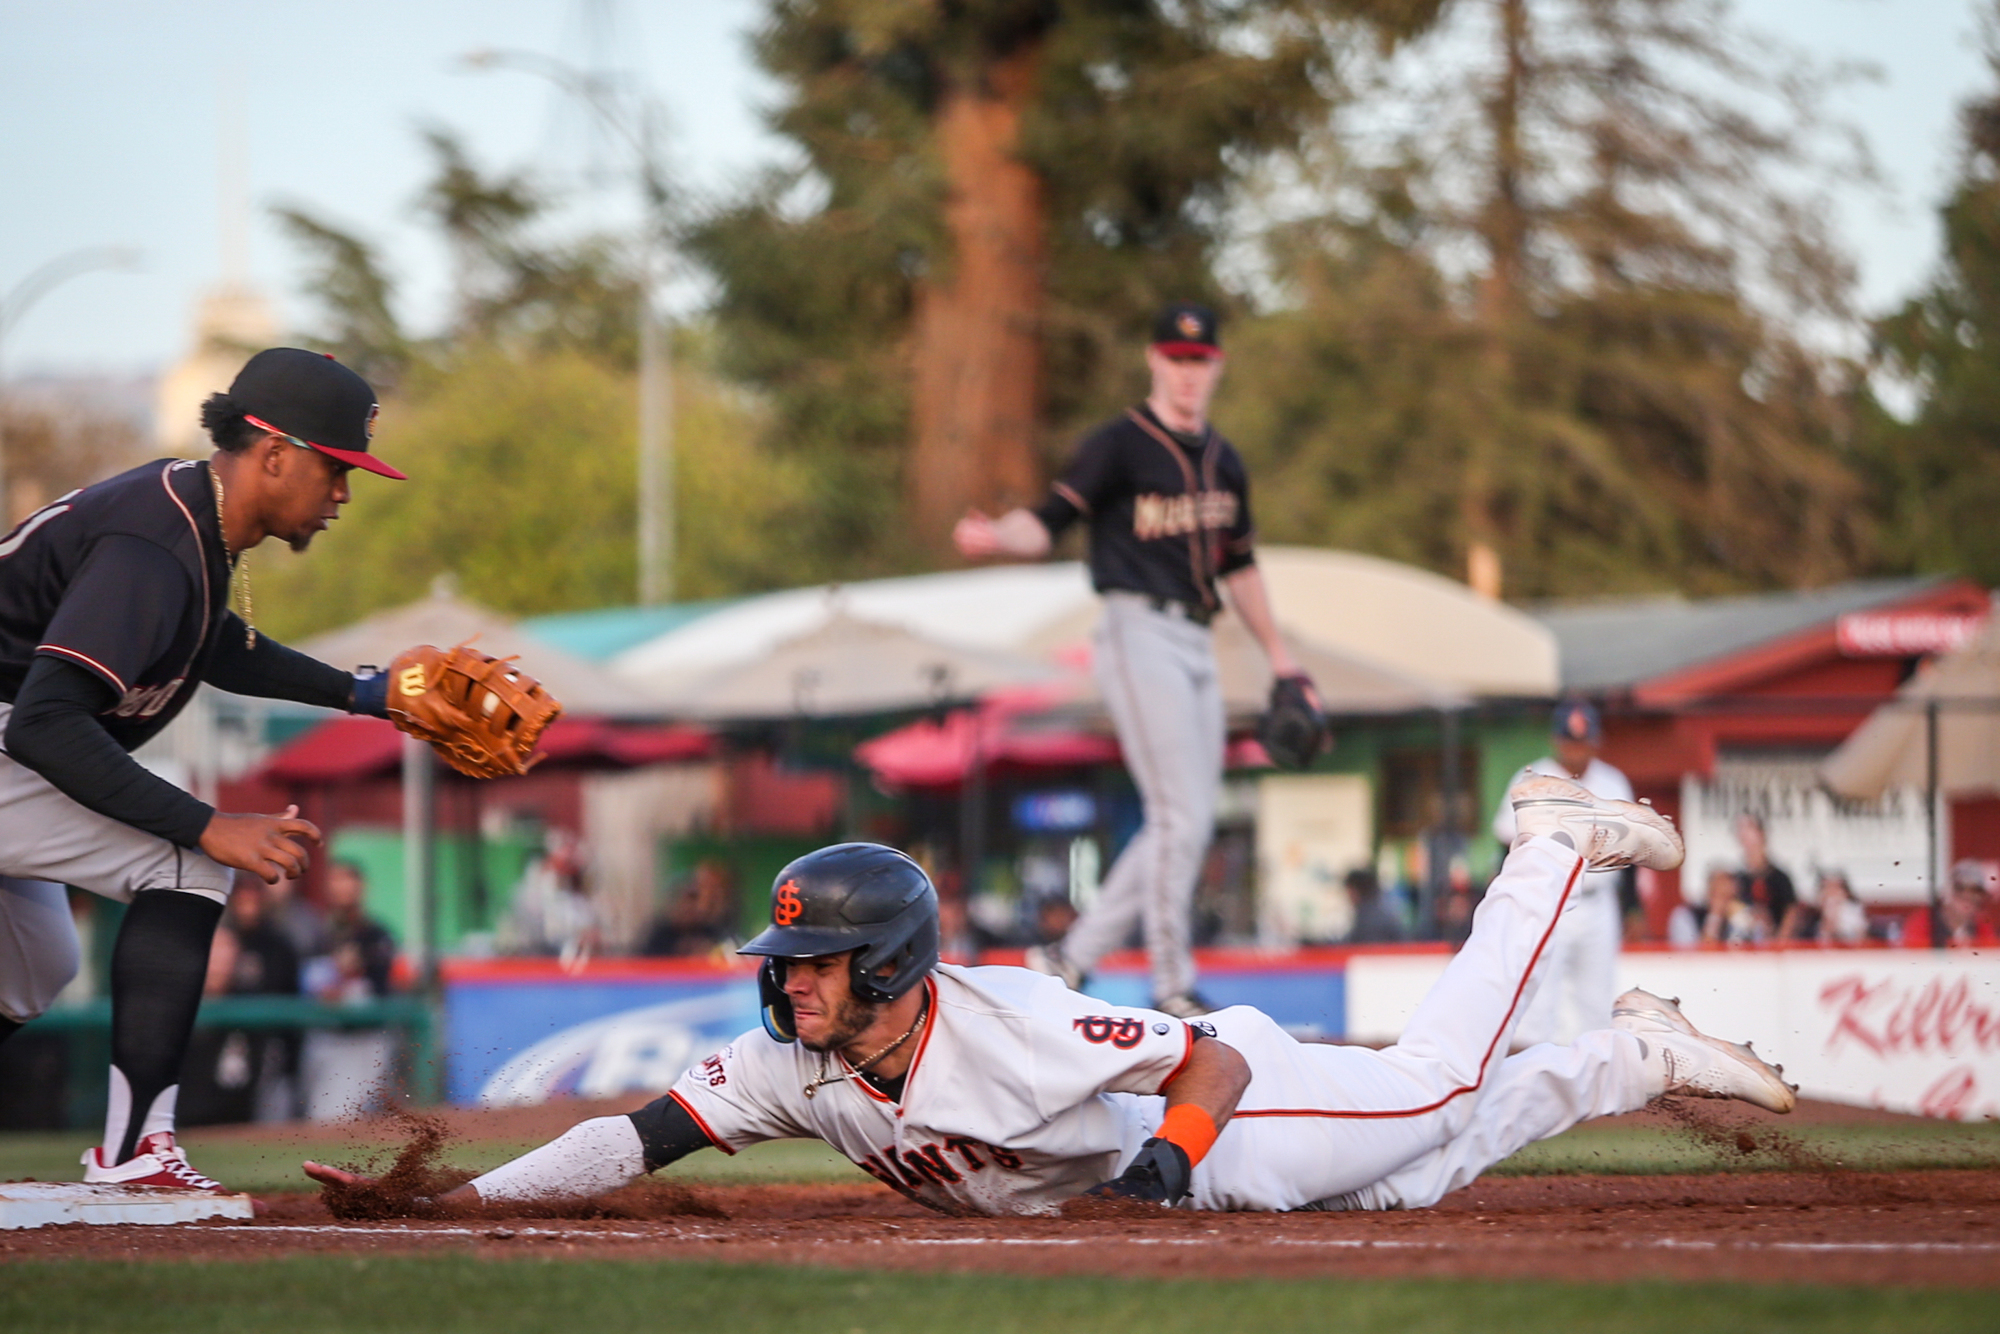 Former Lakewood Ranch High outfielder Grant McCray said he has a goal of nabbing 50 steals this season. (Photo courtesy of Shelly Valenzuela via San Jose Giants)